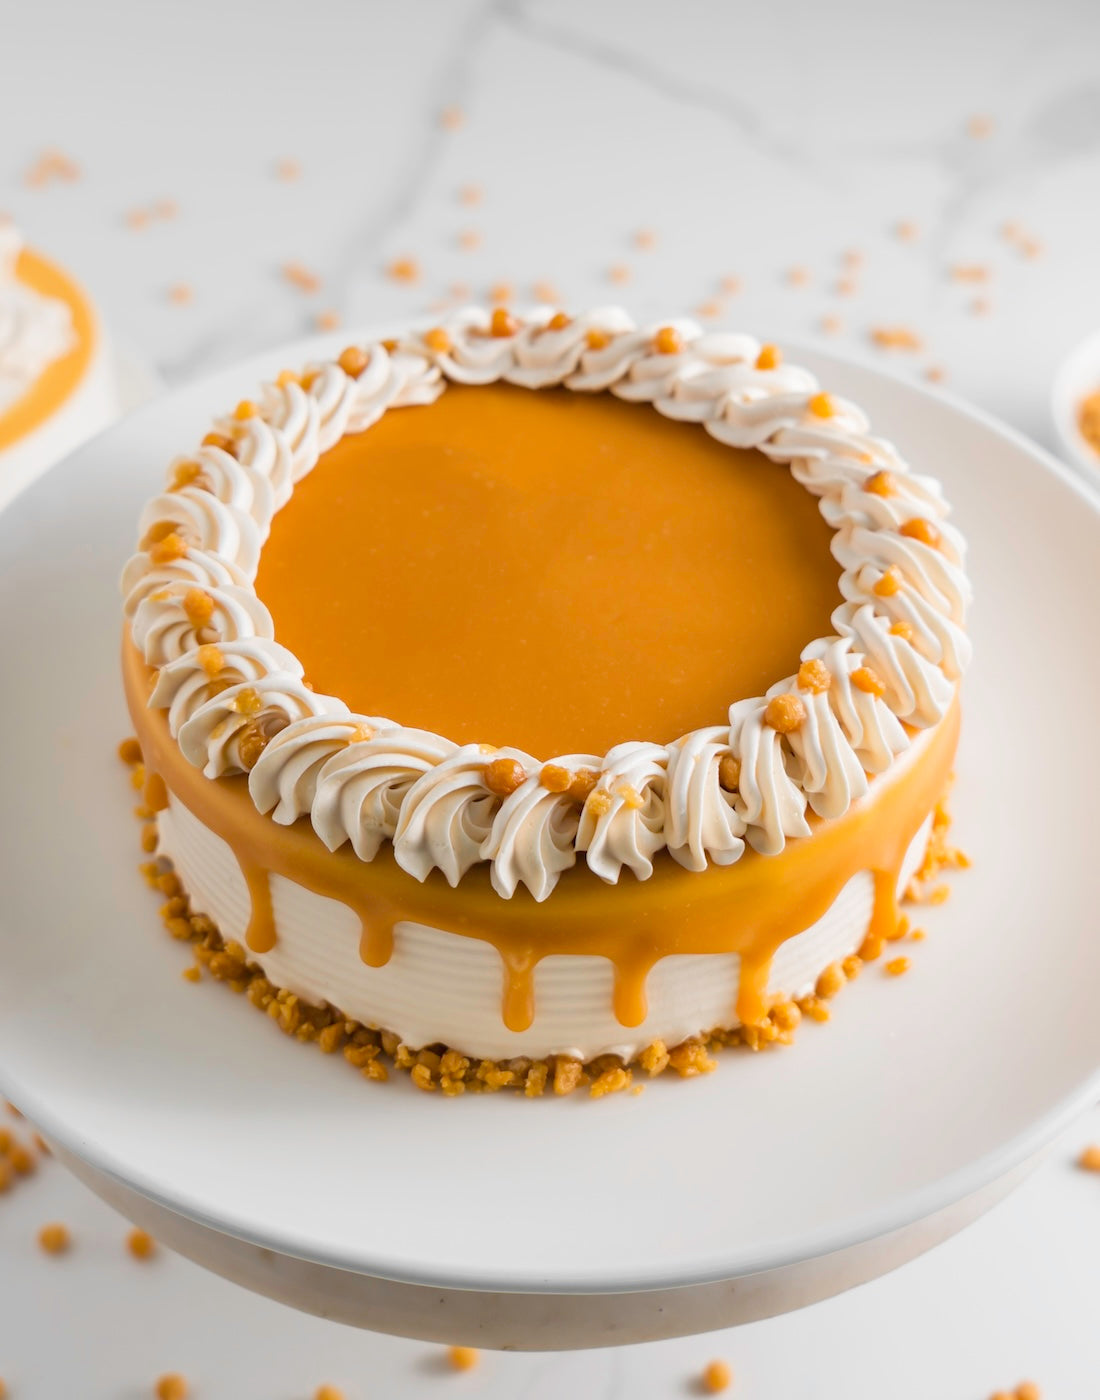 Online Cake Delivery, 3 Hour Delivery in Noida, Butterscotch Cake